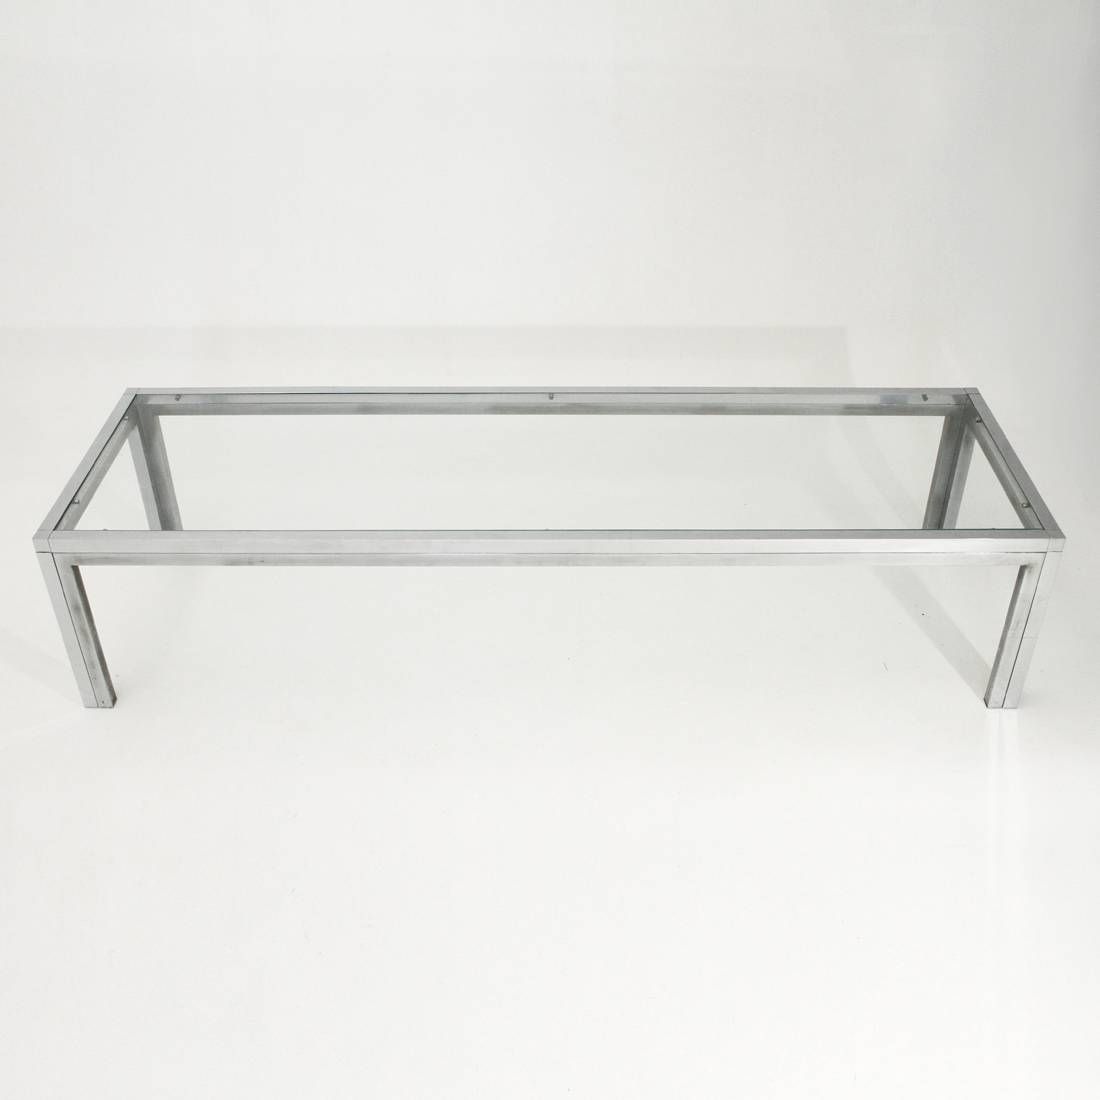 Italian Chrome & Glass Coffee Table For Sale At Pamono With Chrome Glass Coffee Tables (View 4 of 30)